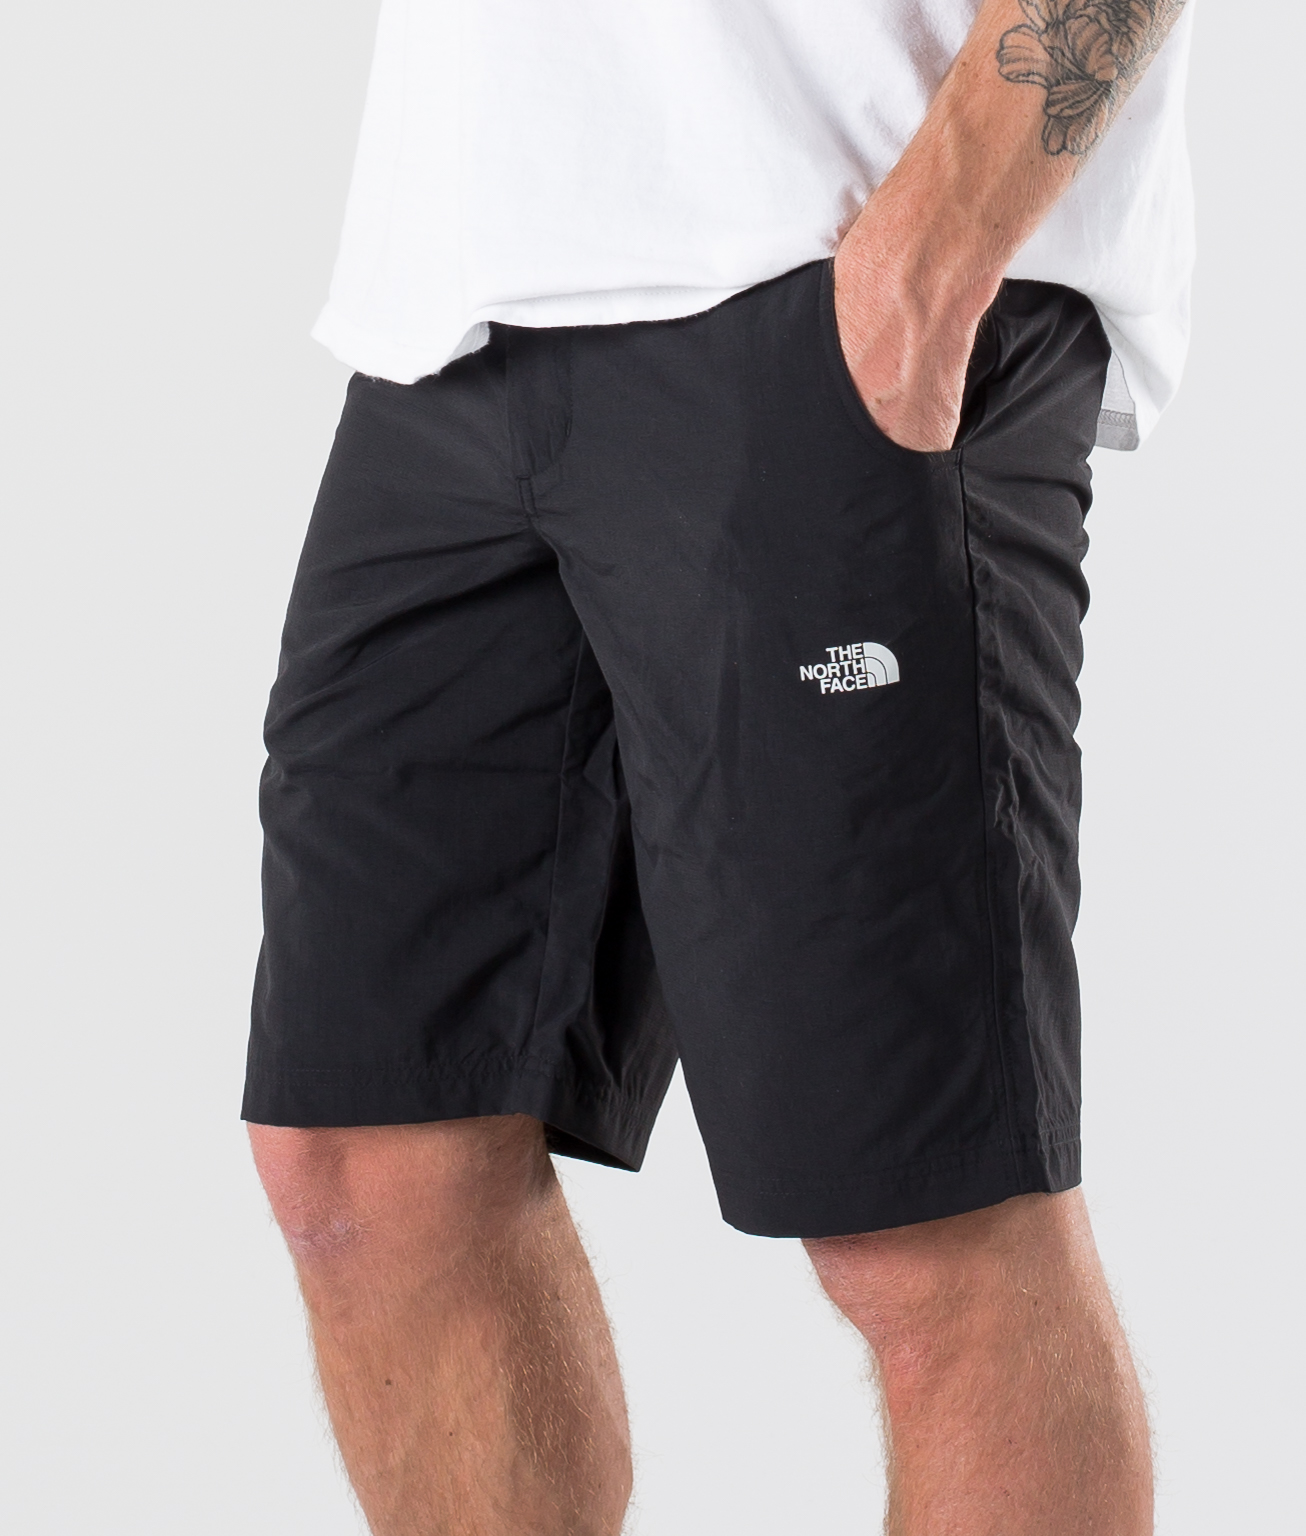 north face shorts with belt